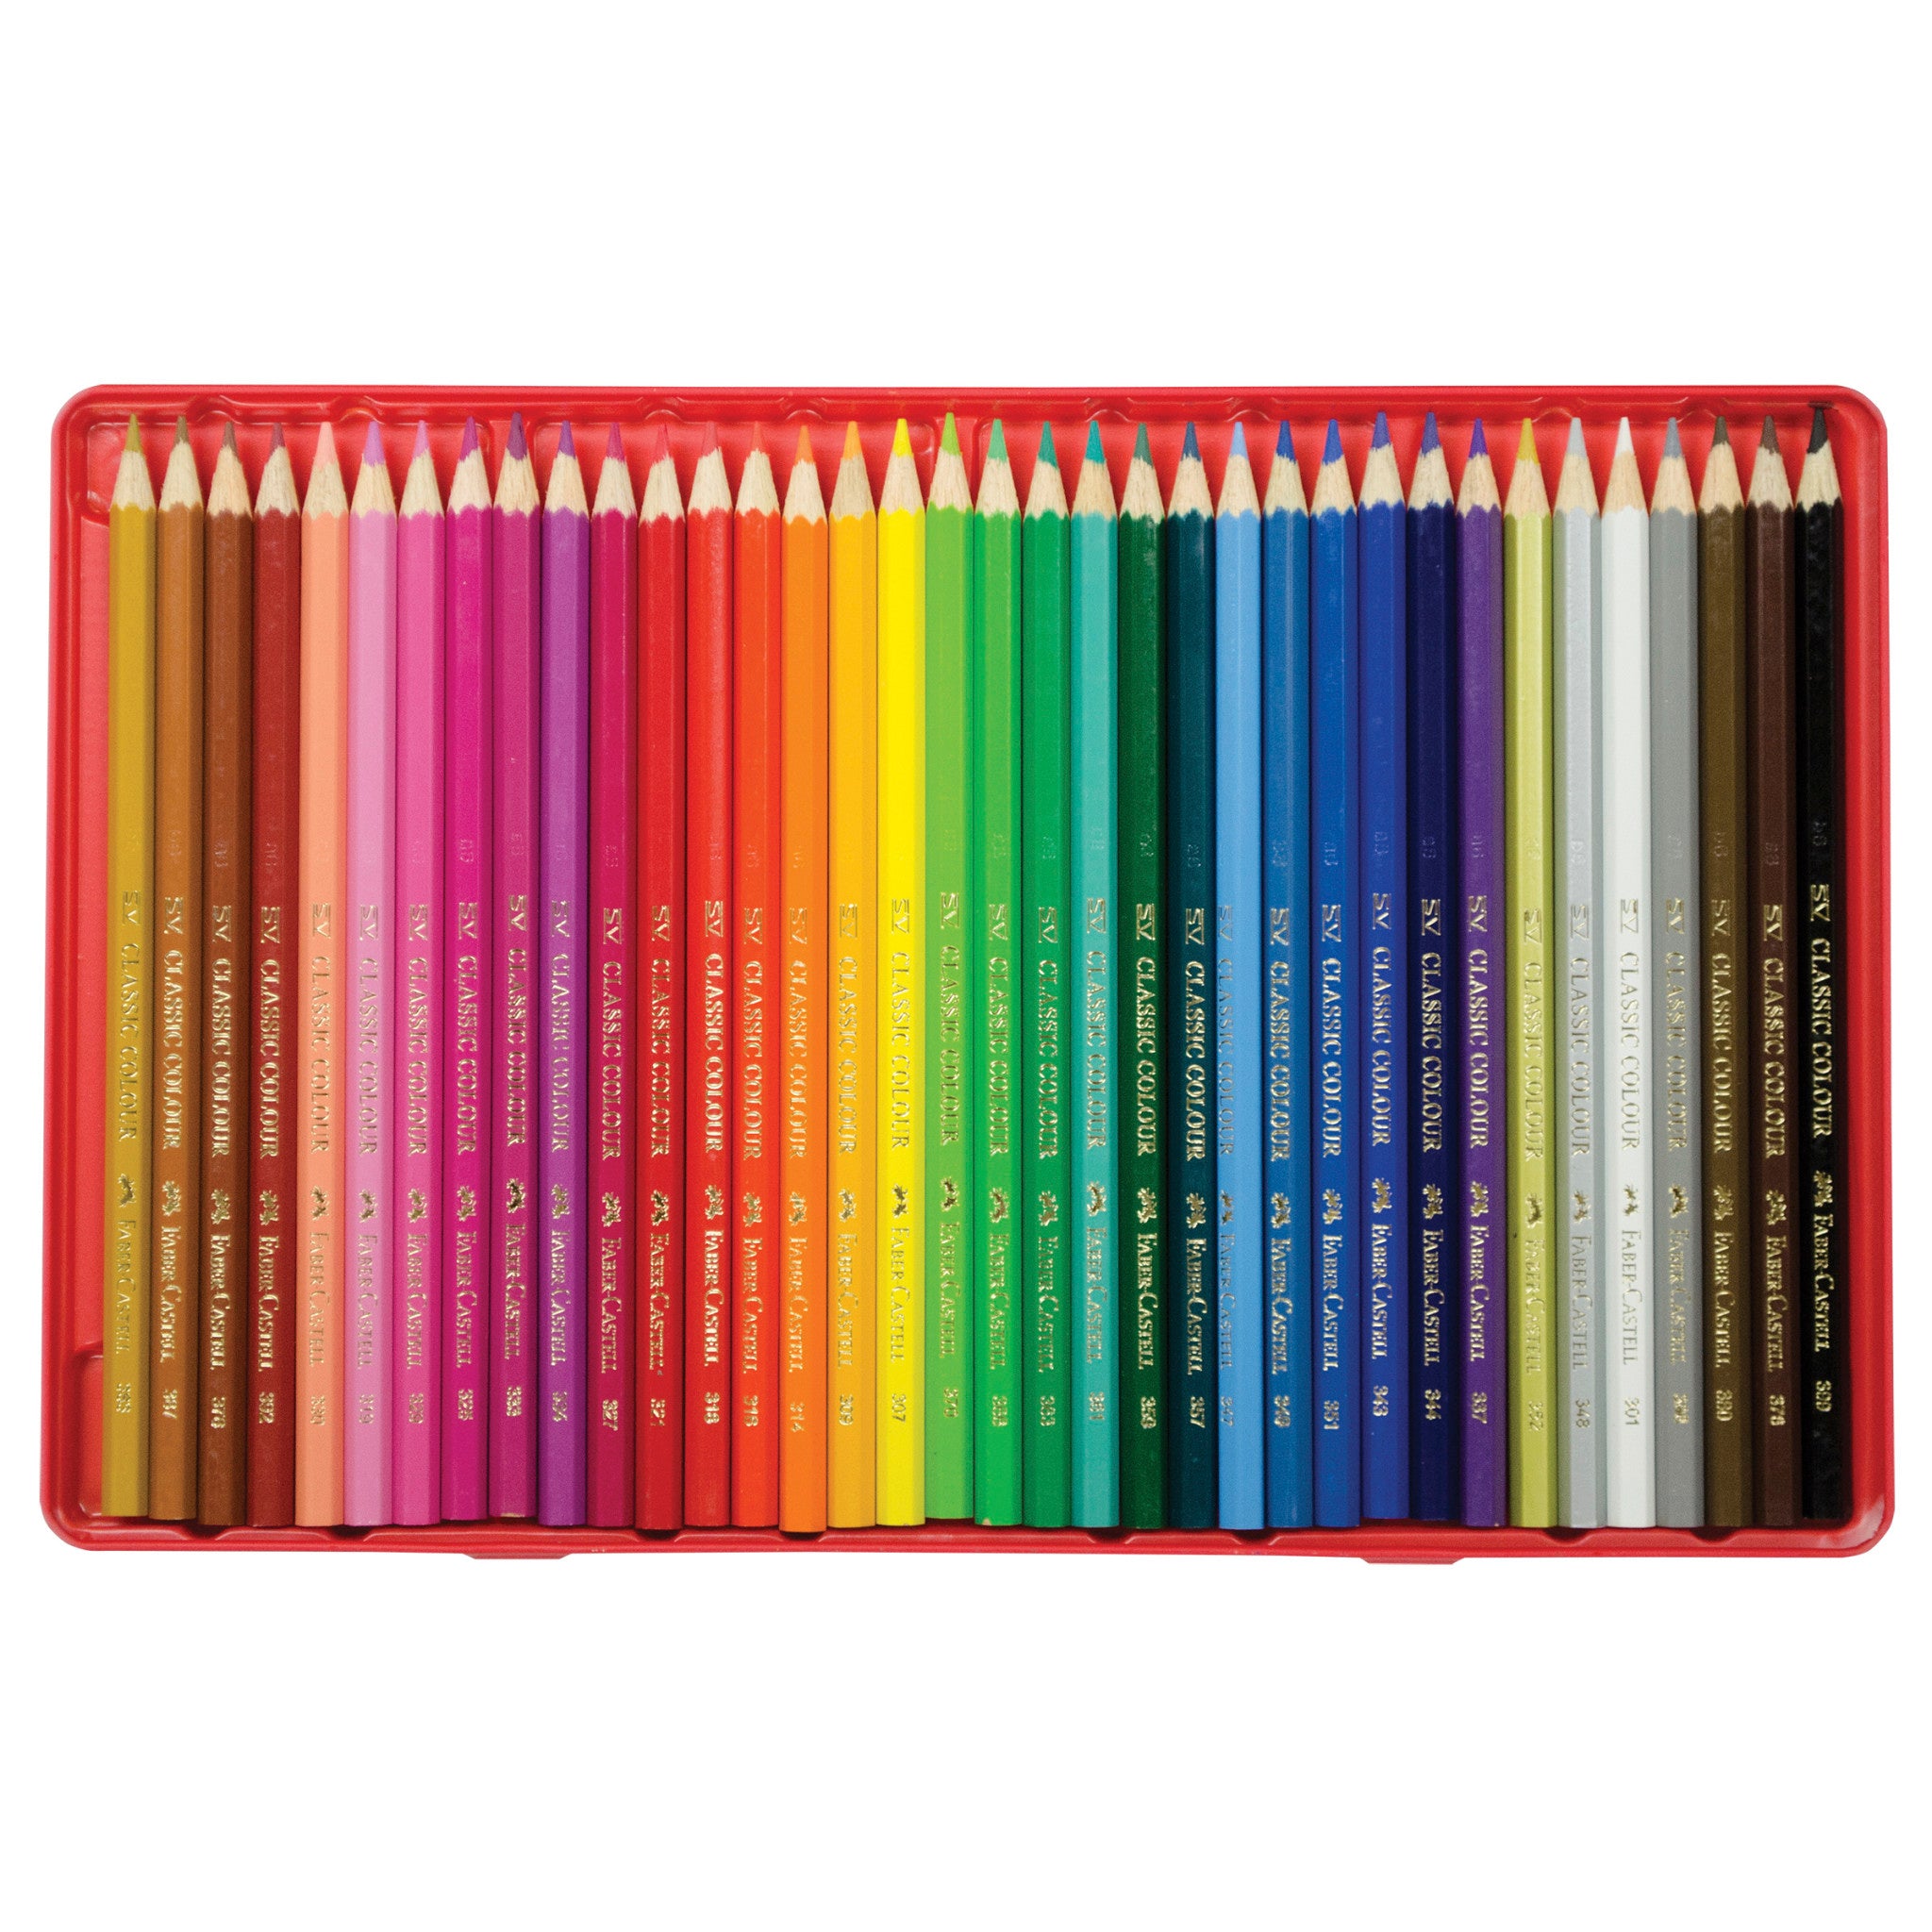  Faber-Castell Classic Colored Pencils Tin Set, 36 Vibrant  Colors In Sturdy Metal Case - Premium Children's Art Products : Office  Products